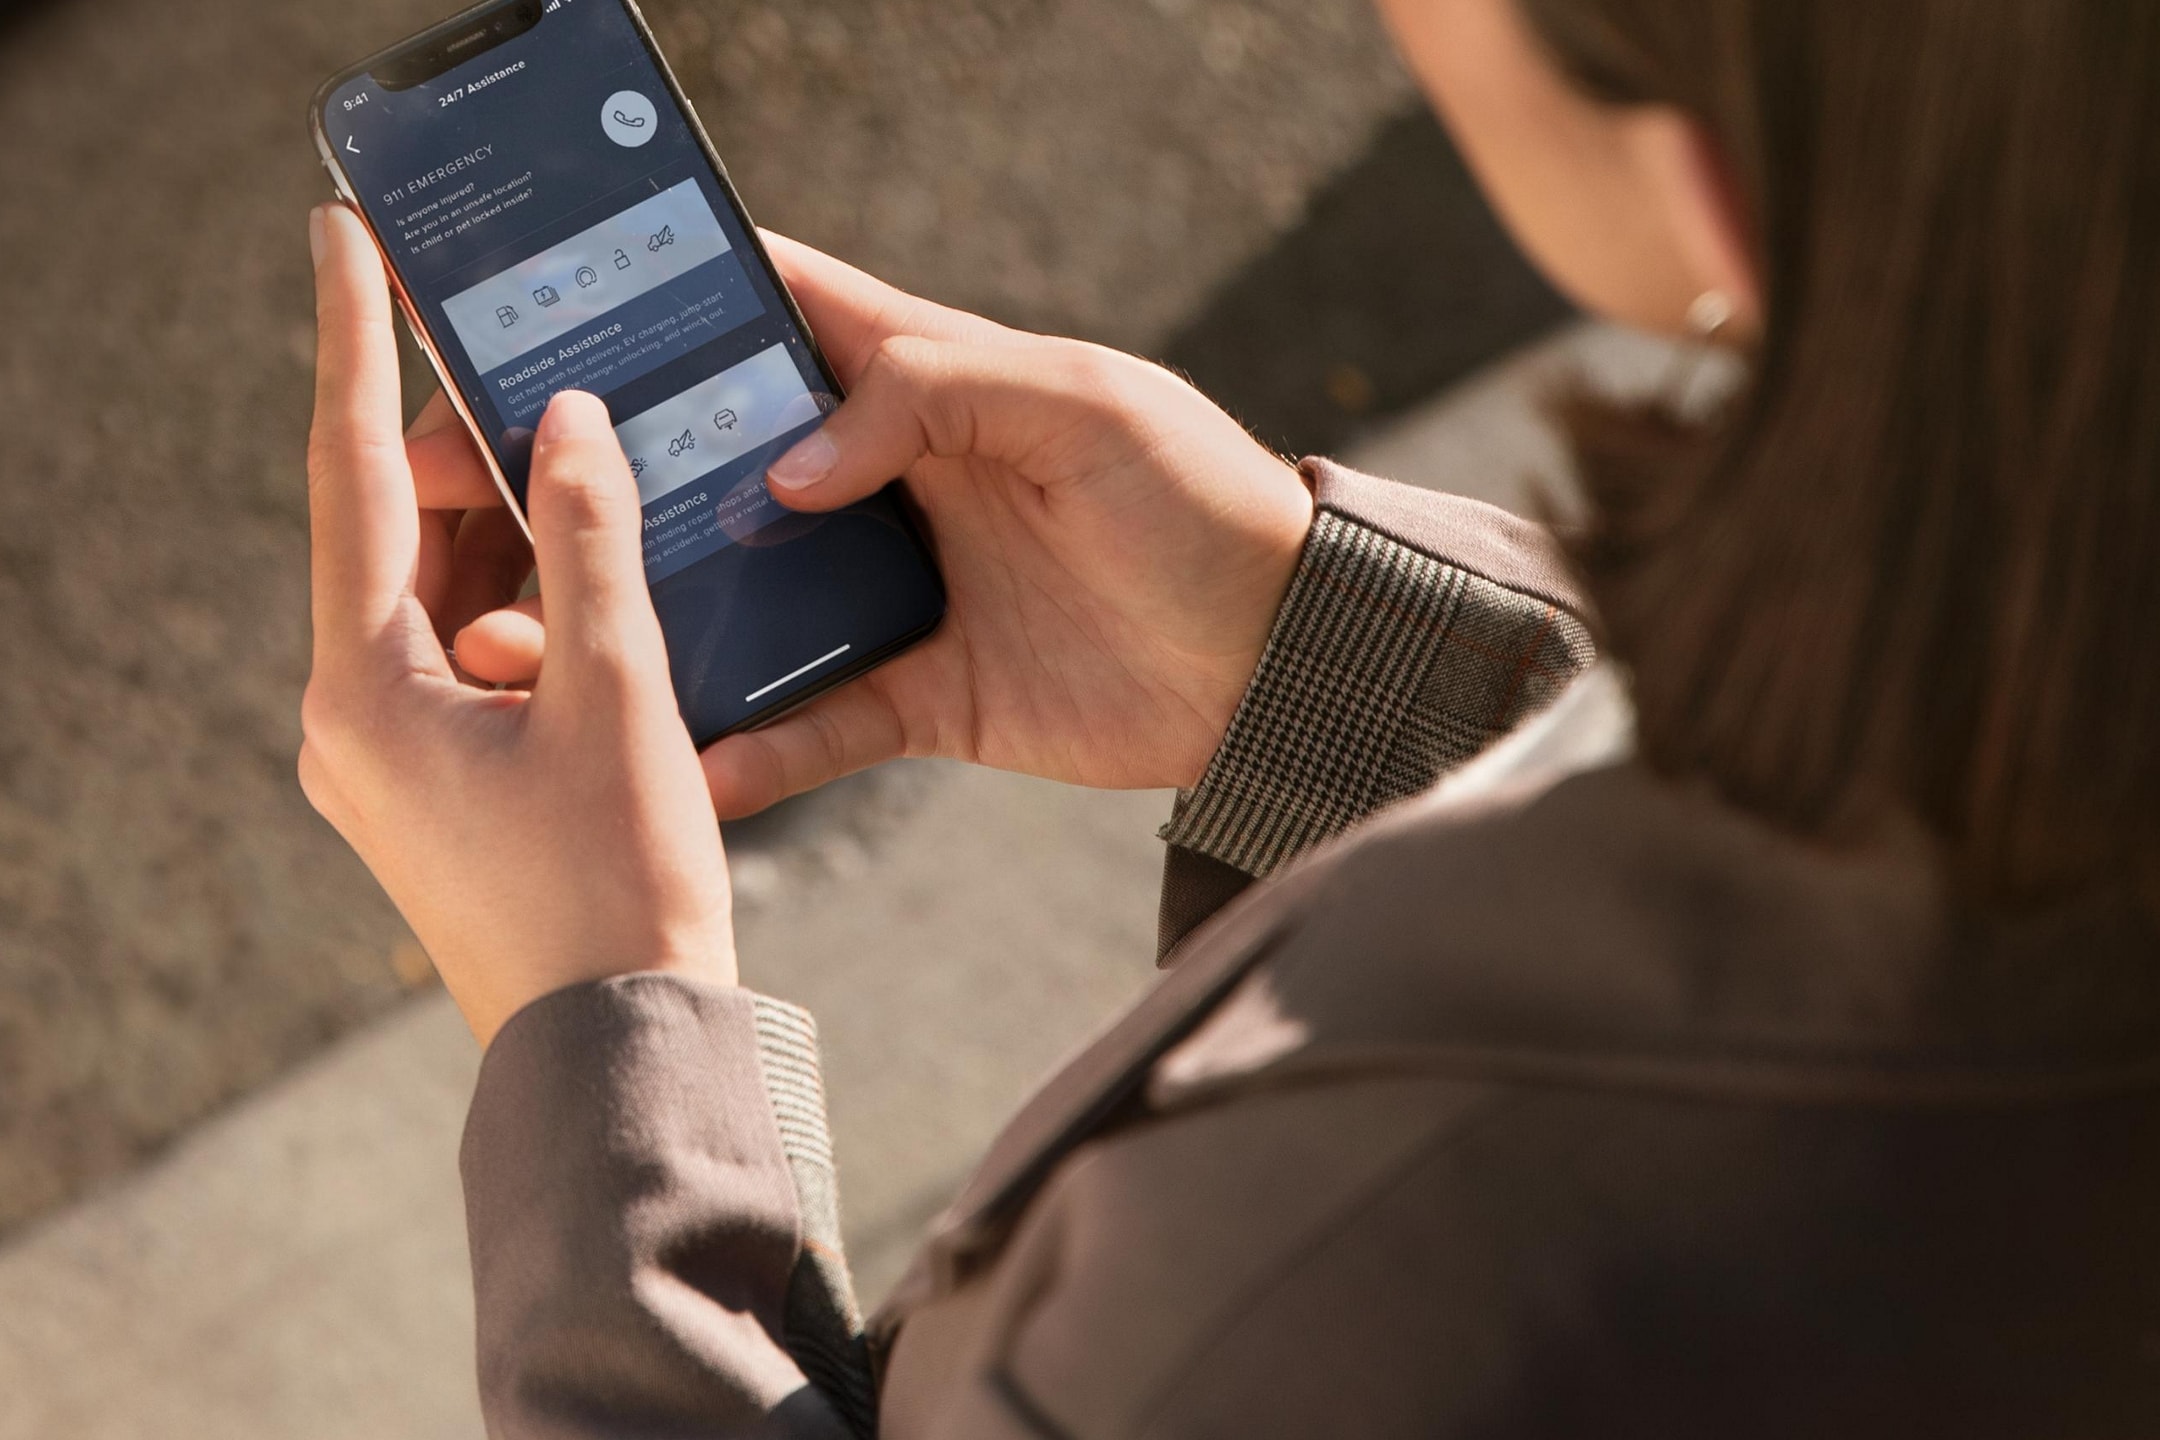 A woman is standing across from her Lincoln vehicle interacting with the Lincoln Way® App on her smartphone device